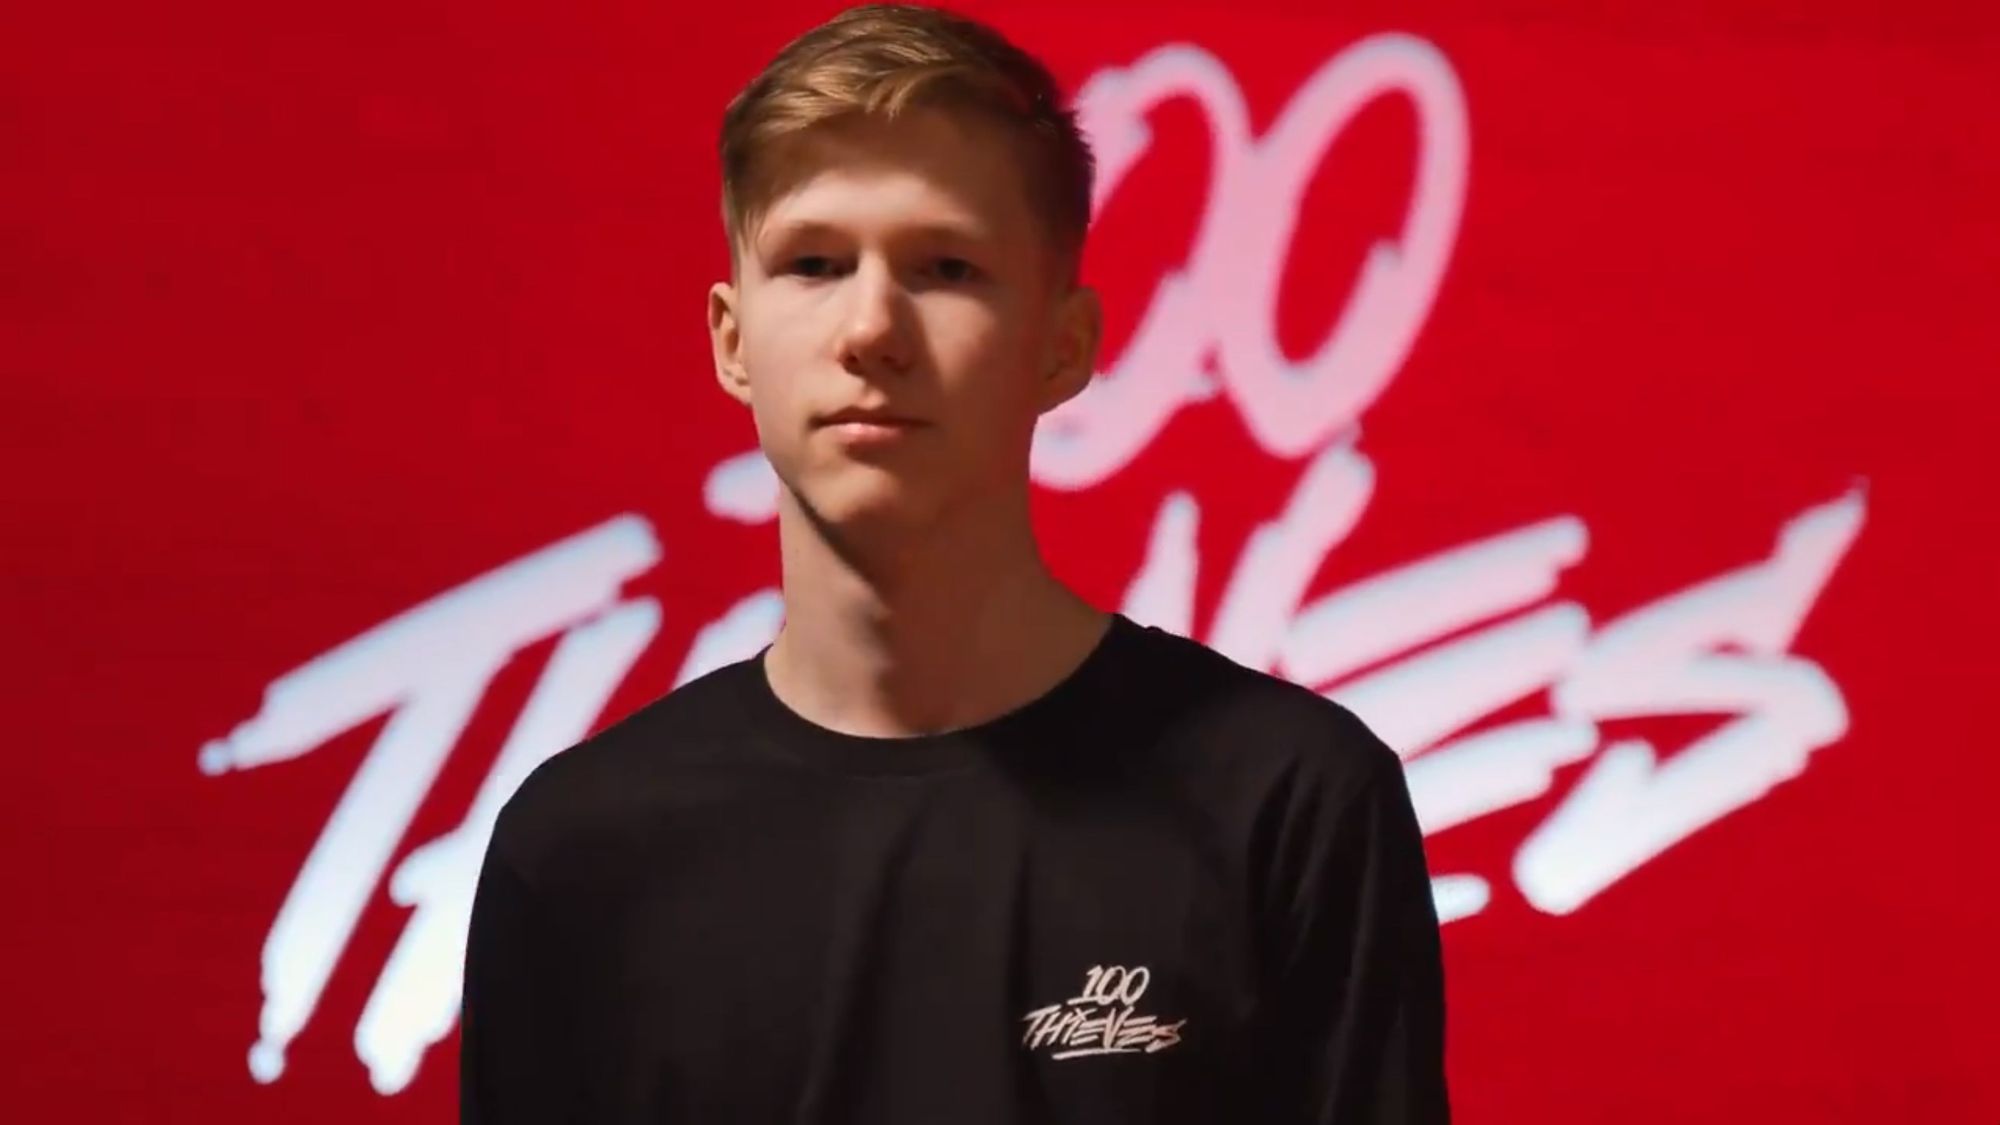 Fortnite Pro Player MrSavage Signs with 100 Thieves